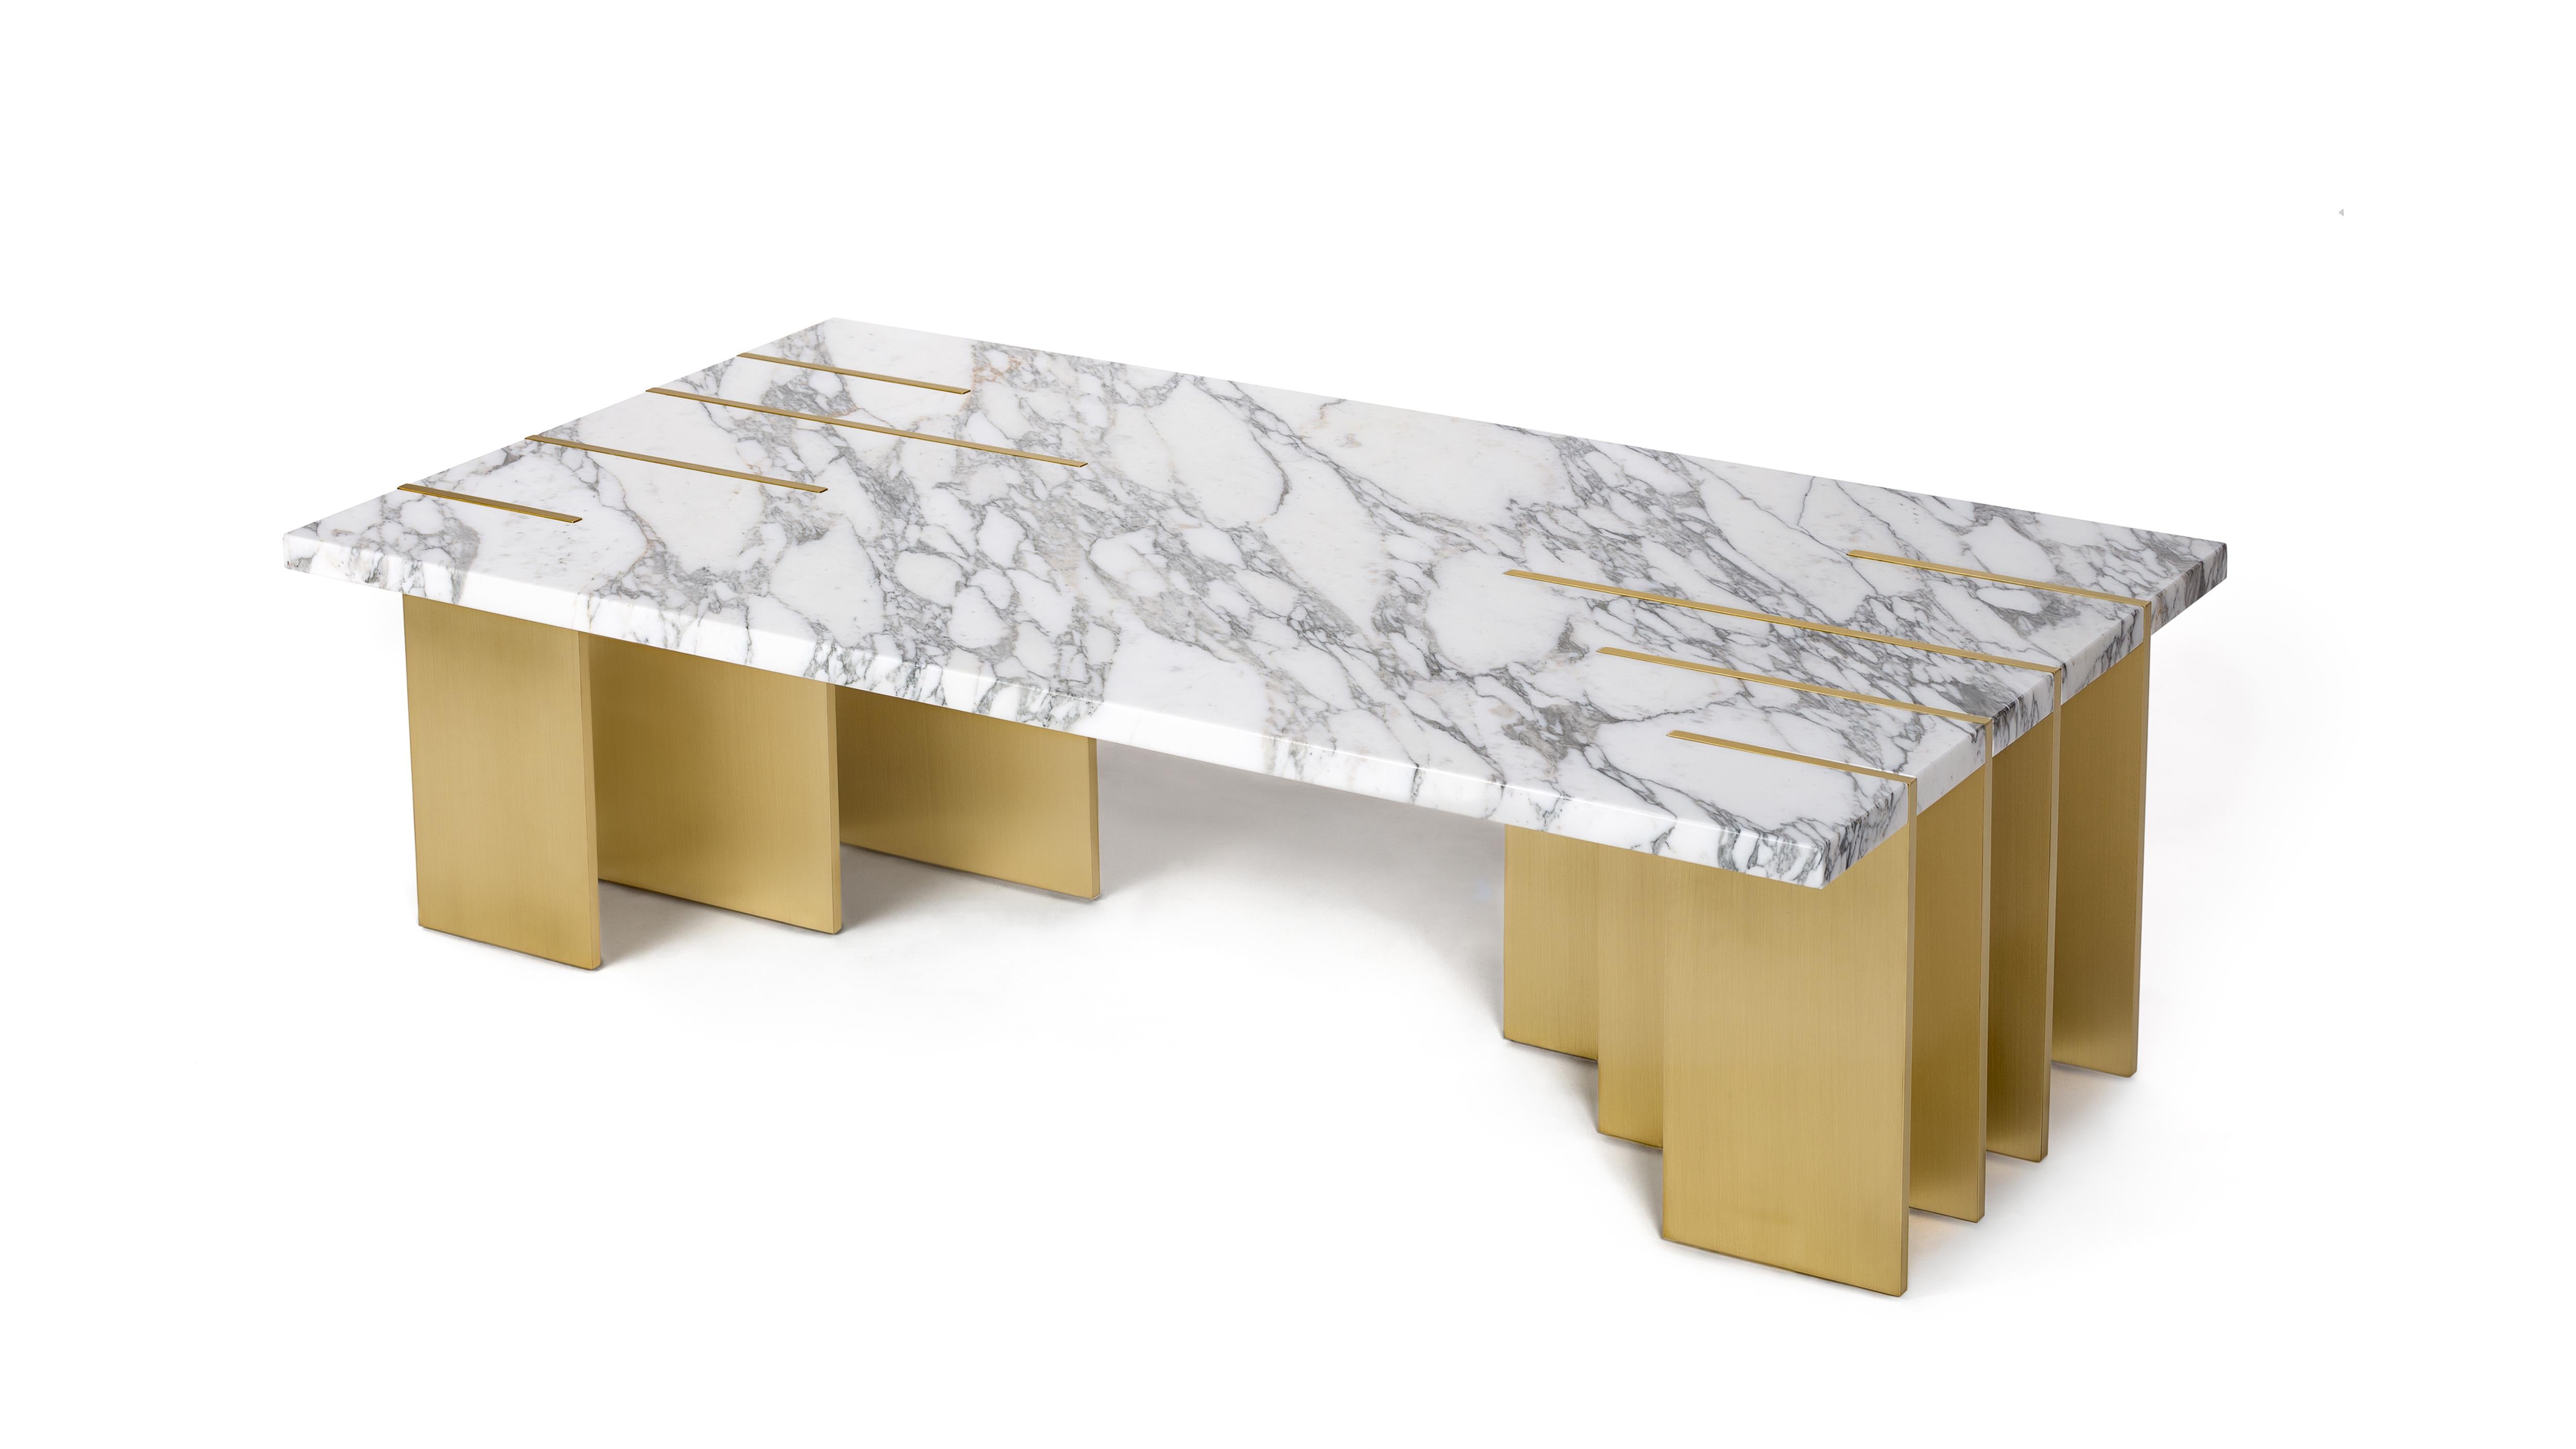 Pianist Calacatta Marble Coffee Table by InsidherLand
Dimensions: D 75 x W 130 x H 38 cm.
Materials: Calacatta marble, brushed brass.
115 kg.
Other marbles are available.

The Pianist coffee table, doesn't represent the piano but the hands of the